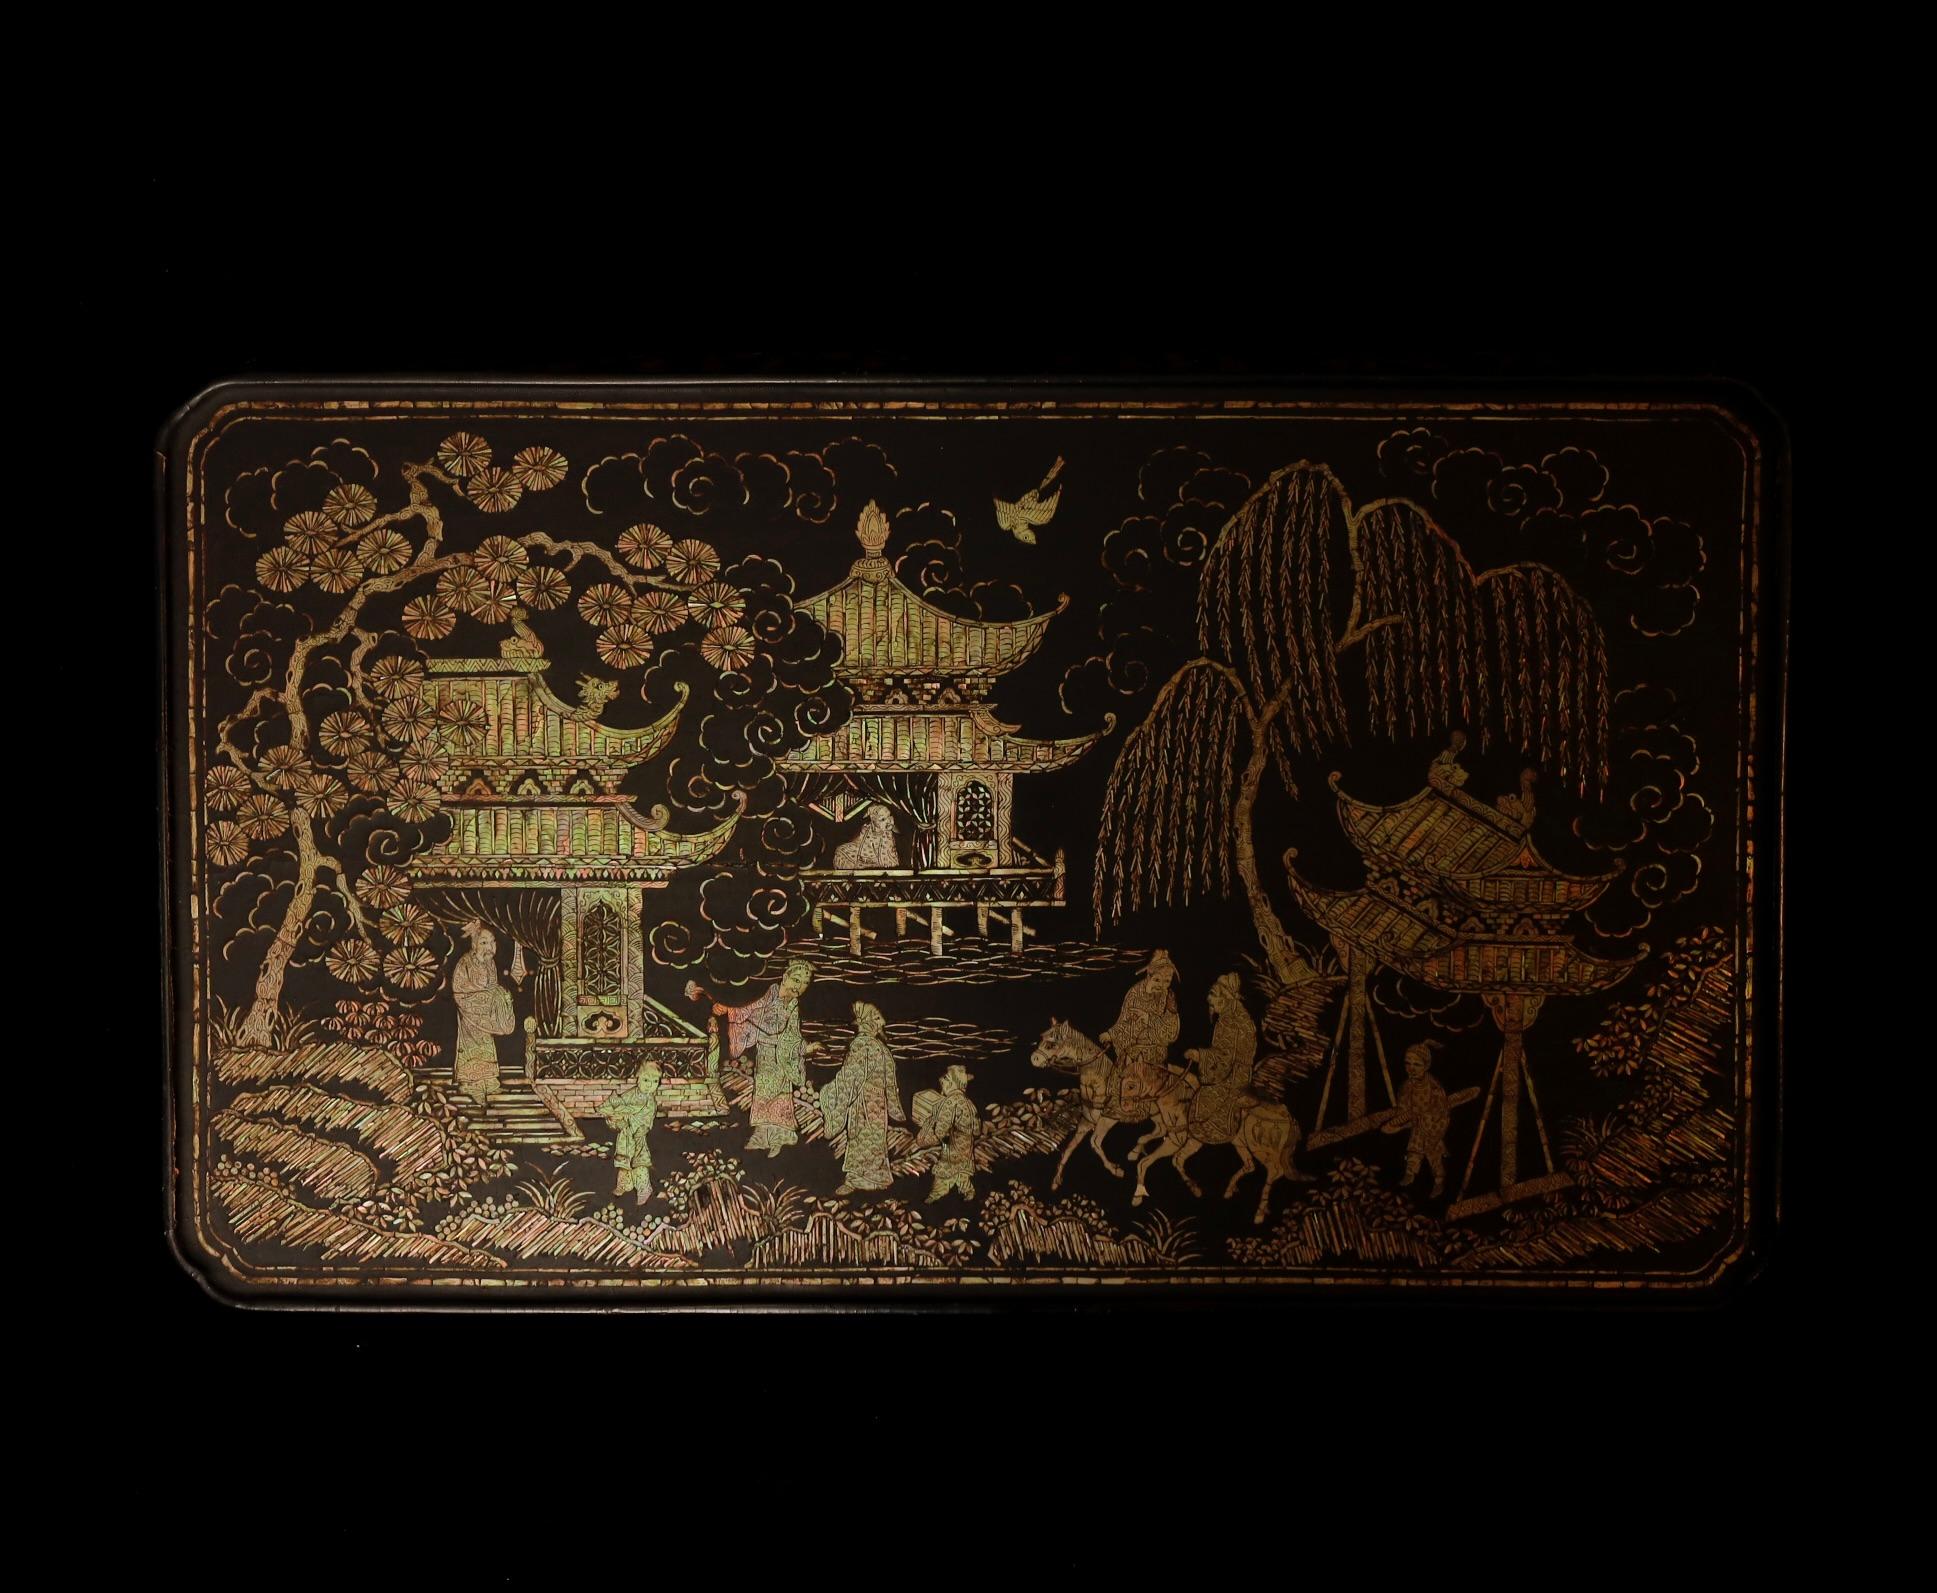 Ming Dynasty Period Scholar's Garden: Mother-of-Pearl Inlaid Lacquer Kang Table For Sale 1